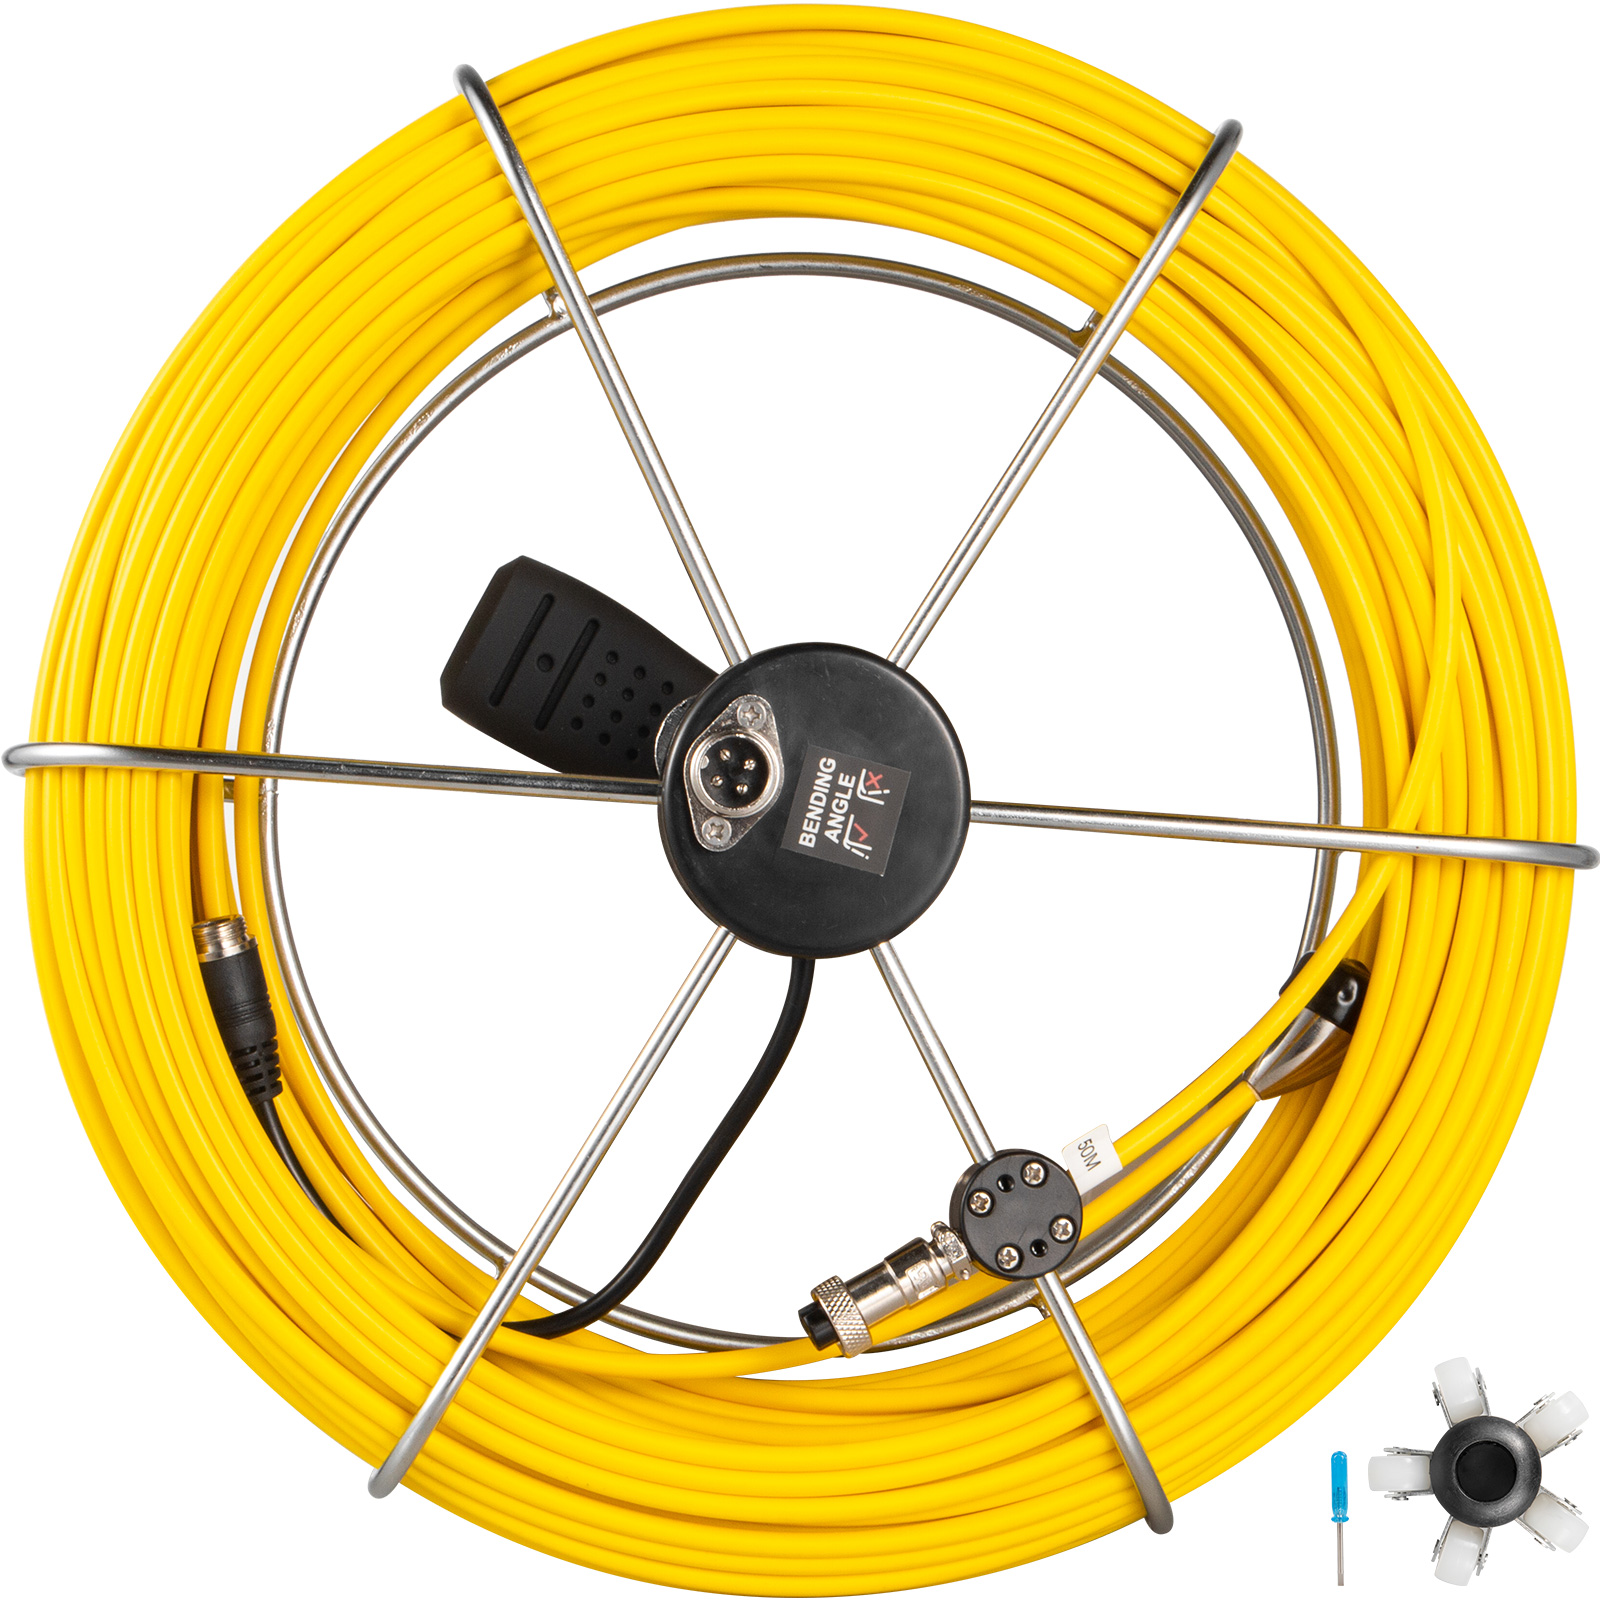 50m Length Pipe Inspection Camera Cable With Handle System Sewer Drain Pipeline от Vevor Many GEOs